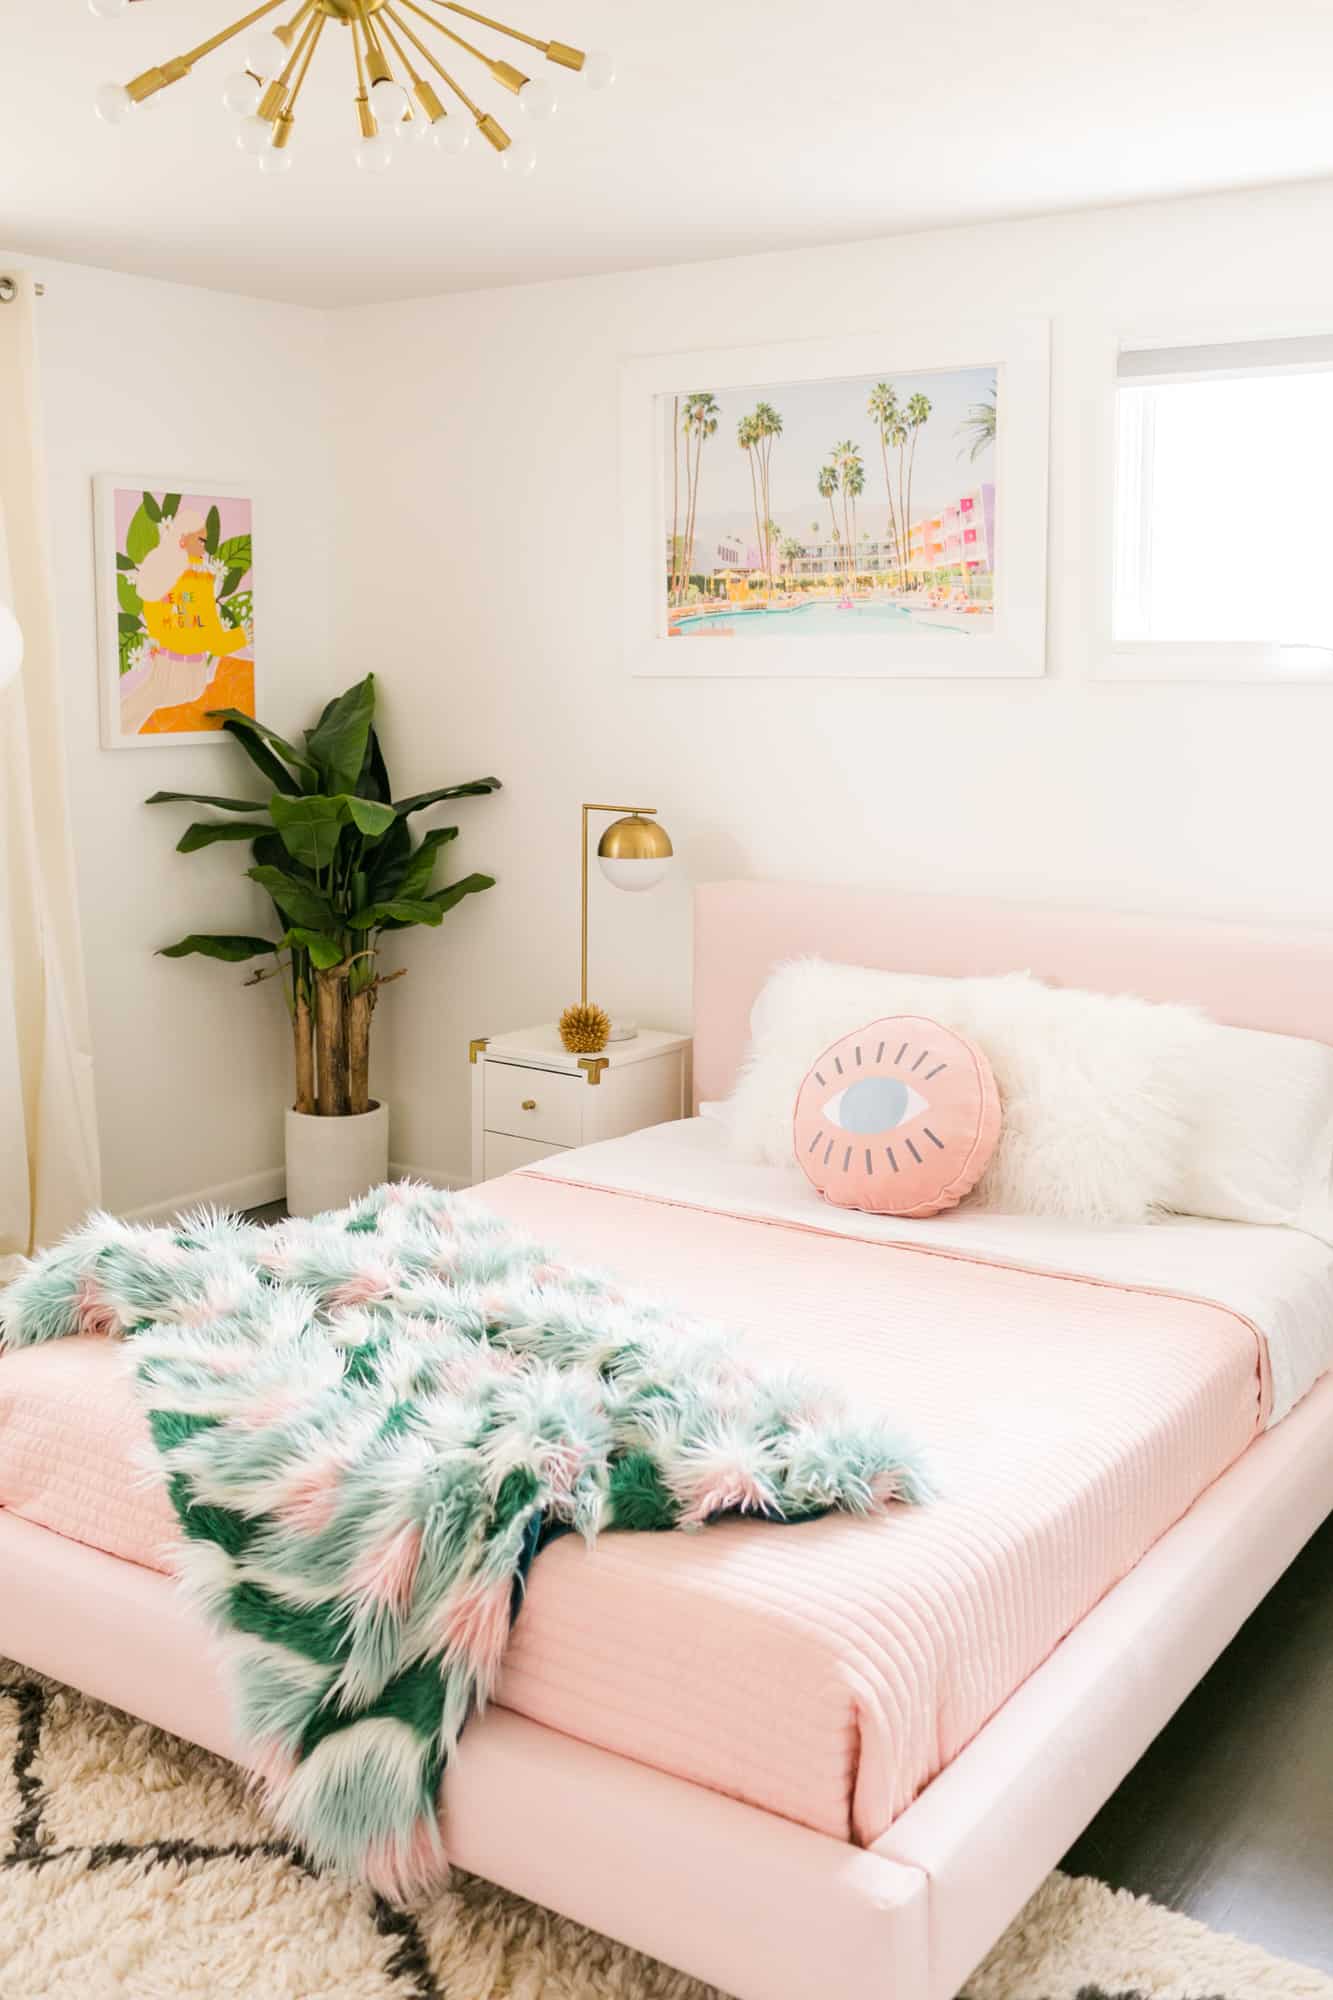 Laura's Master Bedroom Refresh (Before + After!) - A Beautiful Mess